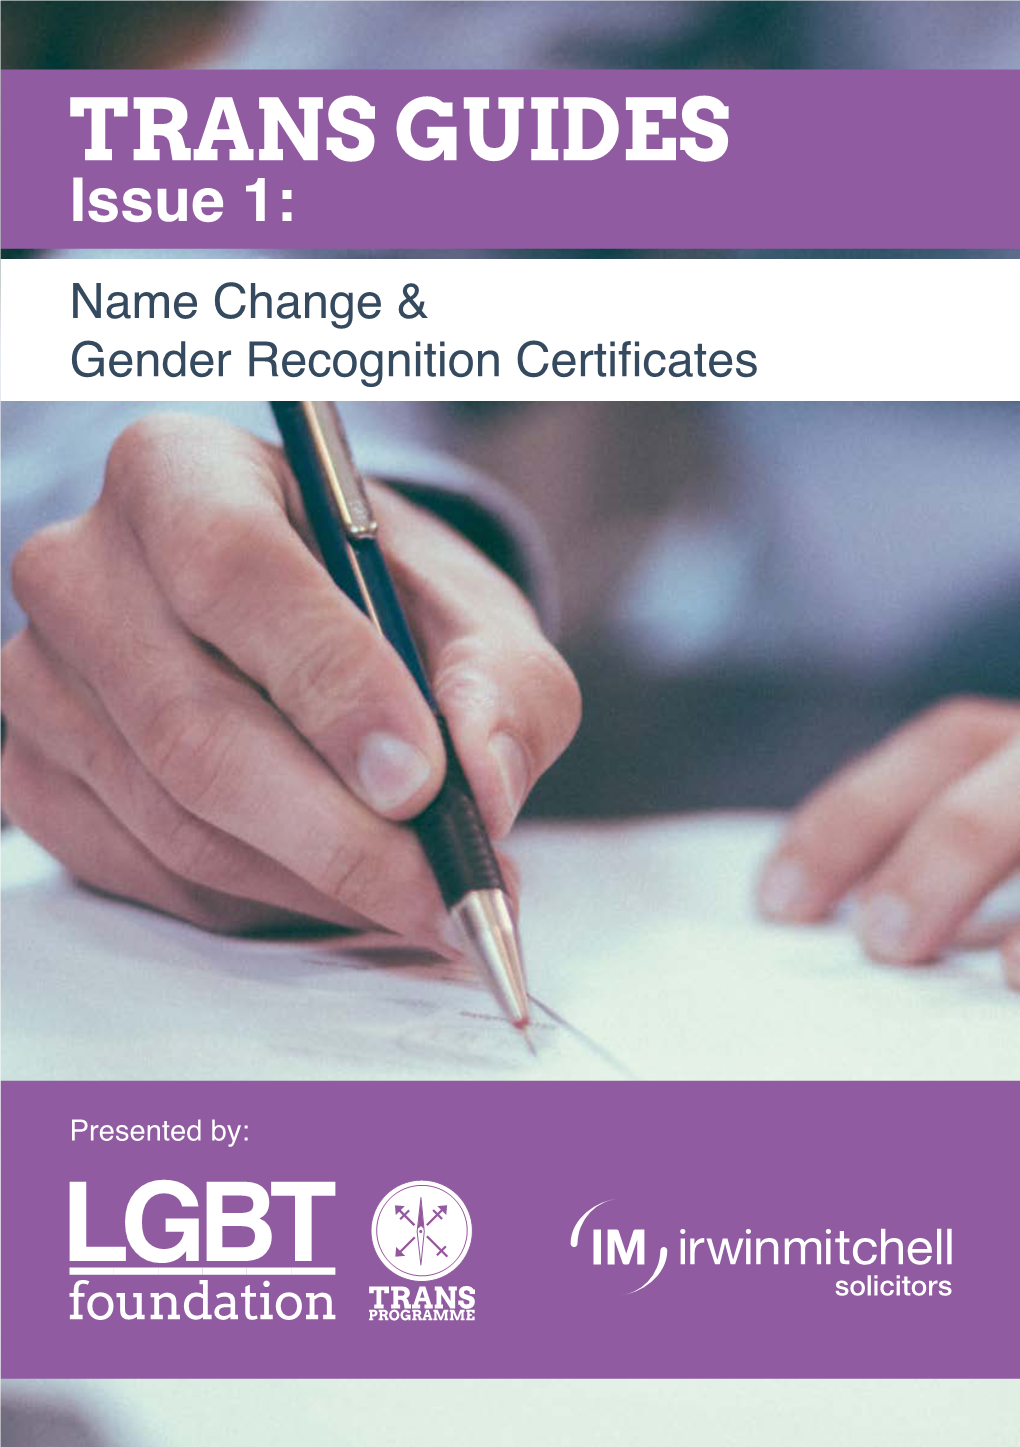 TRANS GUIDES Issue 1: Name Change & Gender Recognition Certificates